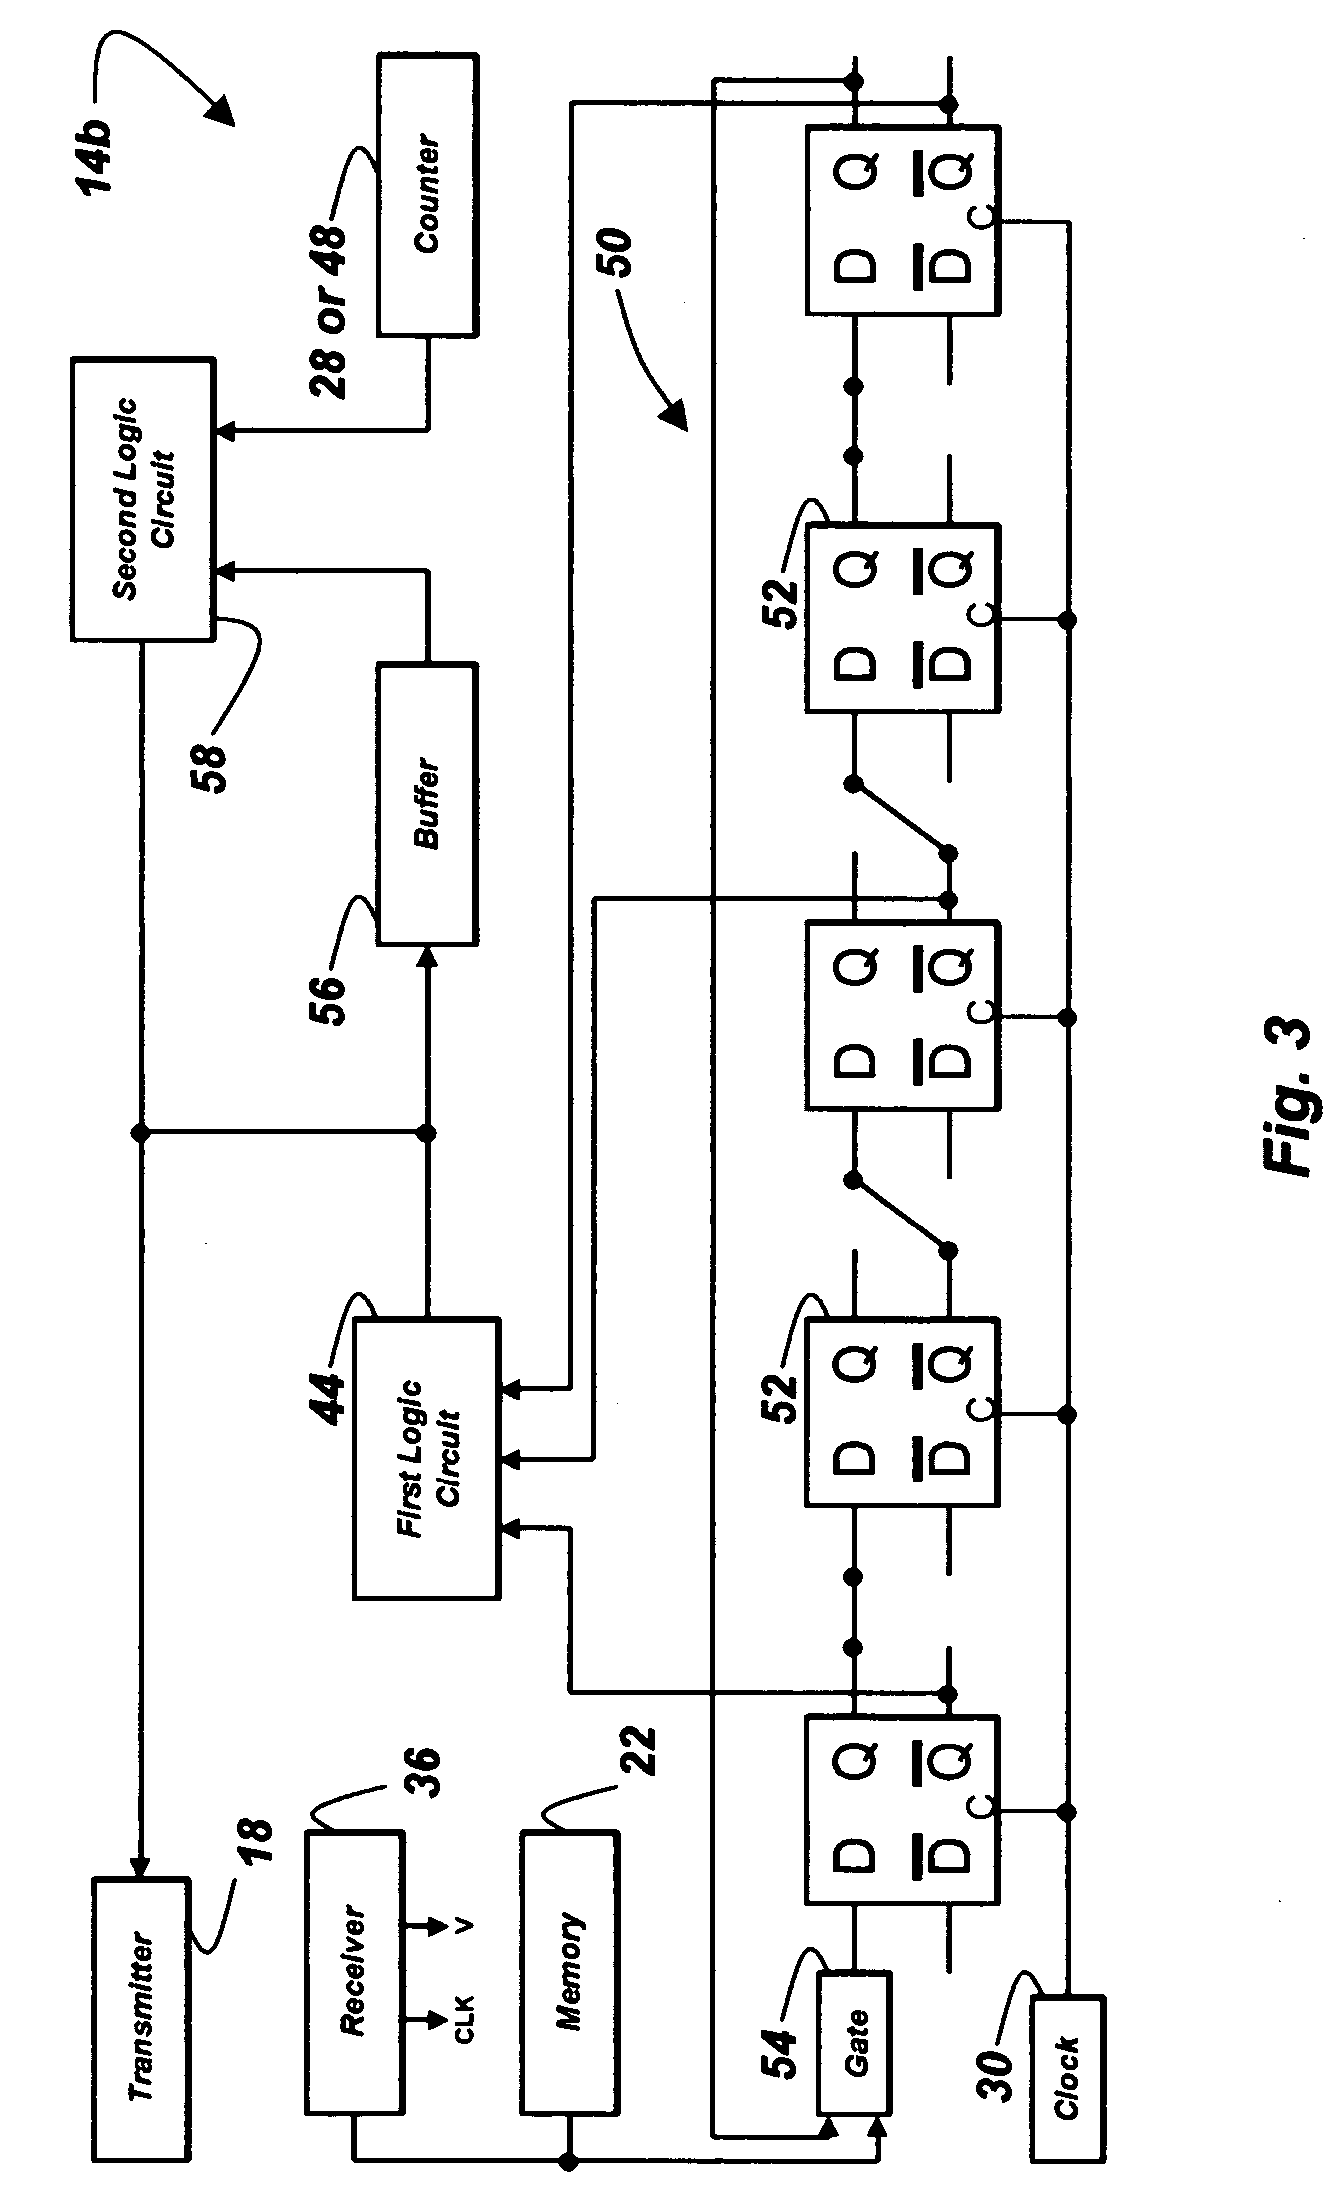 System and method for electronic article surveillance